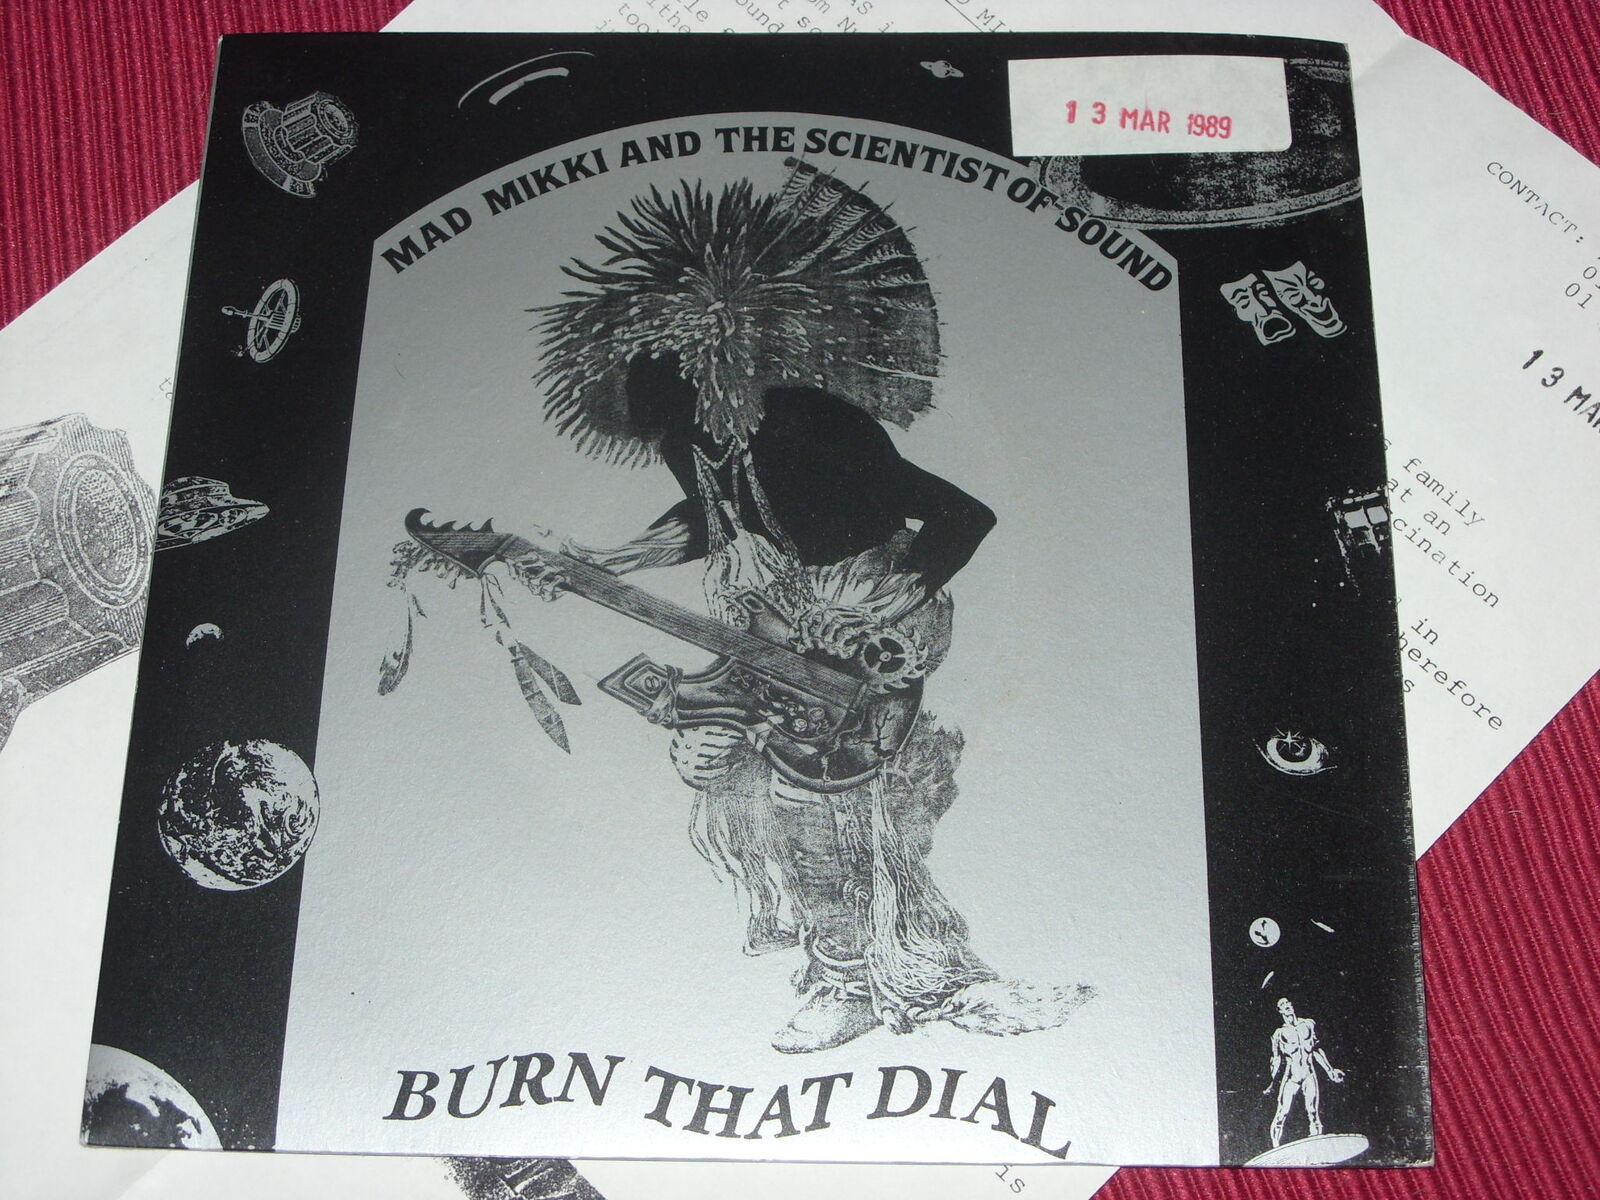 Mad Mikki & Scientists Of Sound:  Burn That Dial    UK  NM   7" + press release